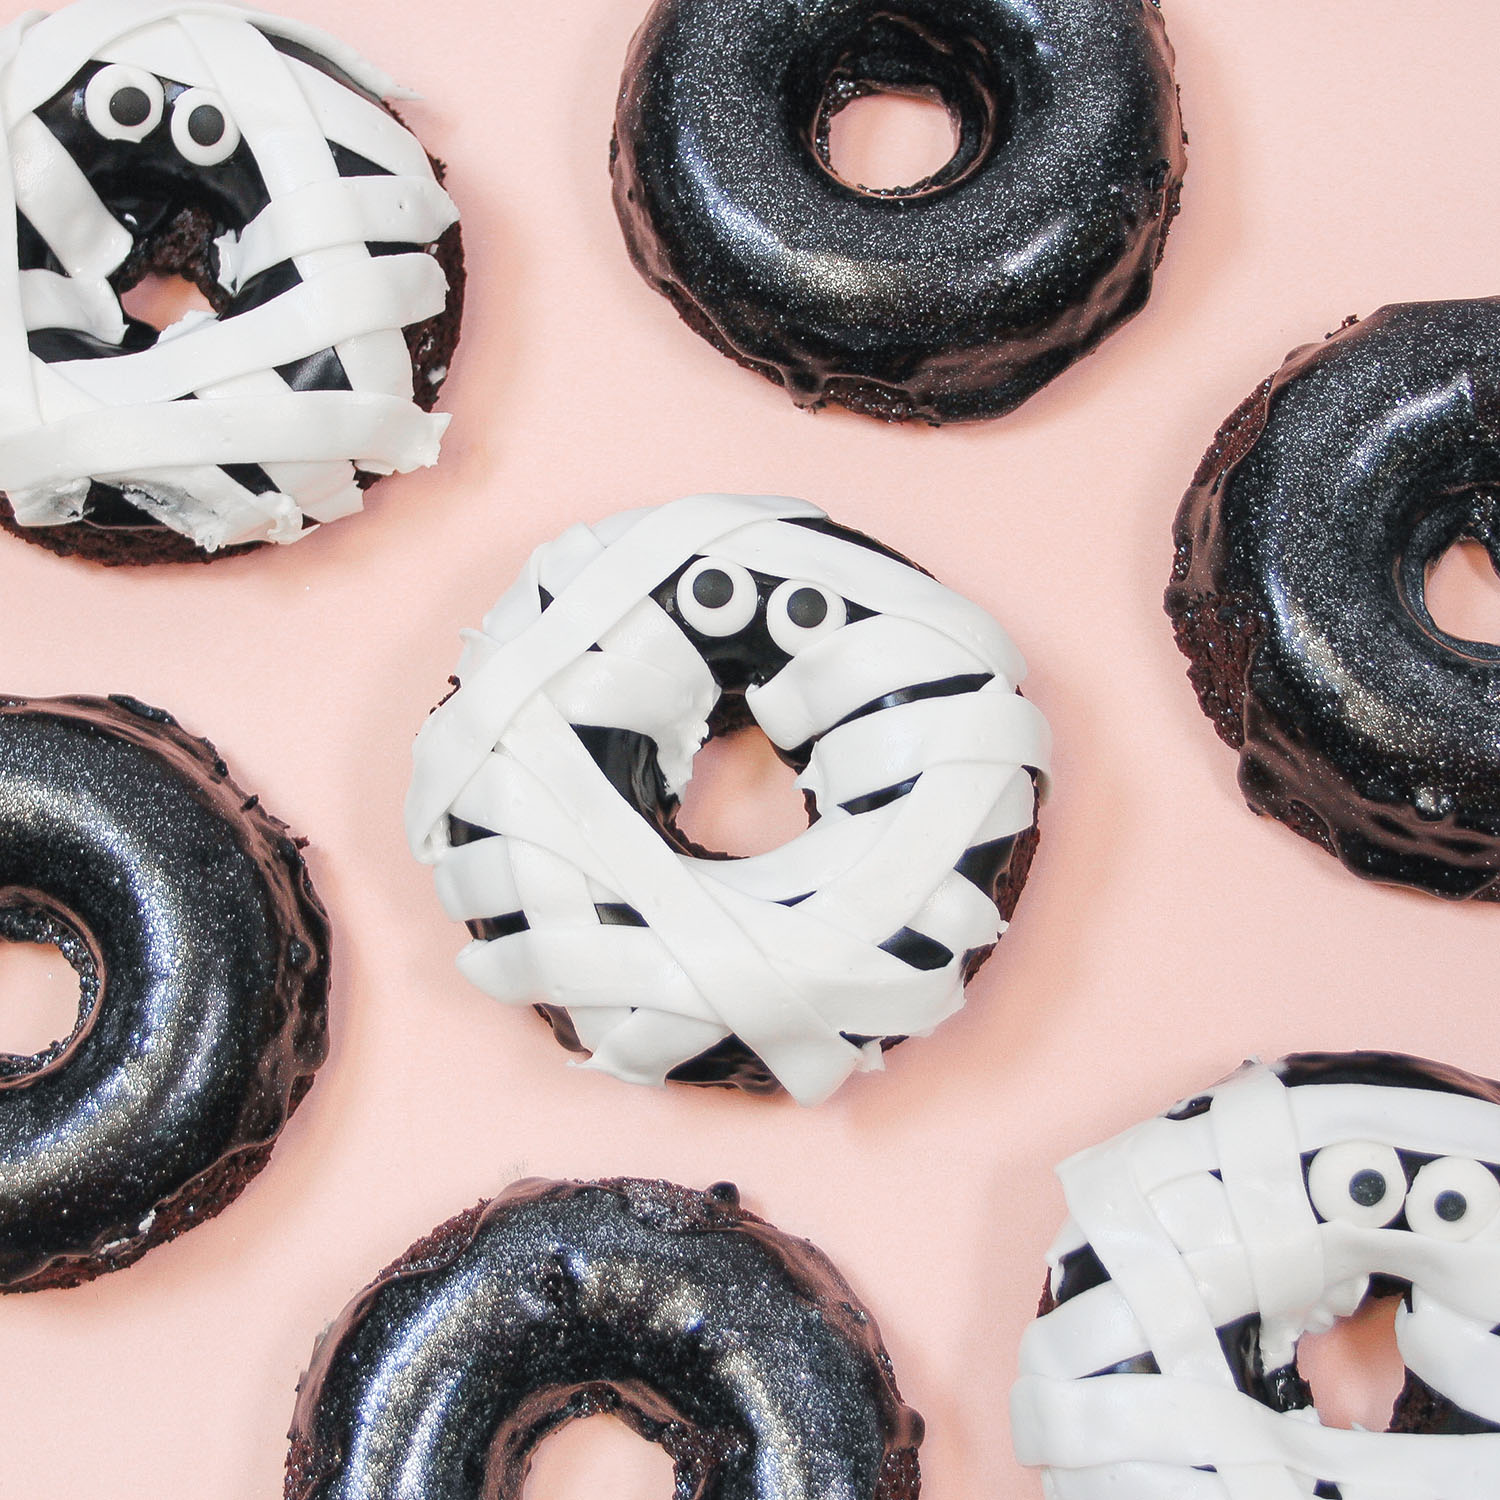 Mummy Donuts and Black Glittered Donuts